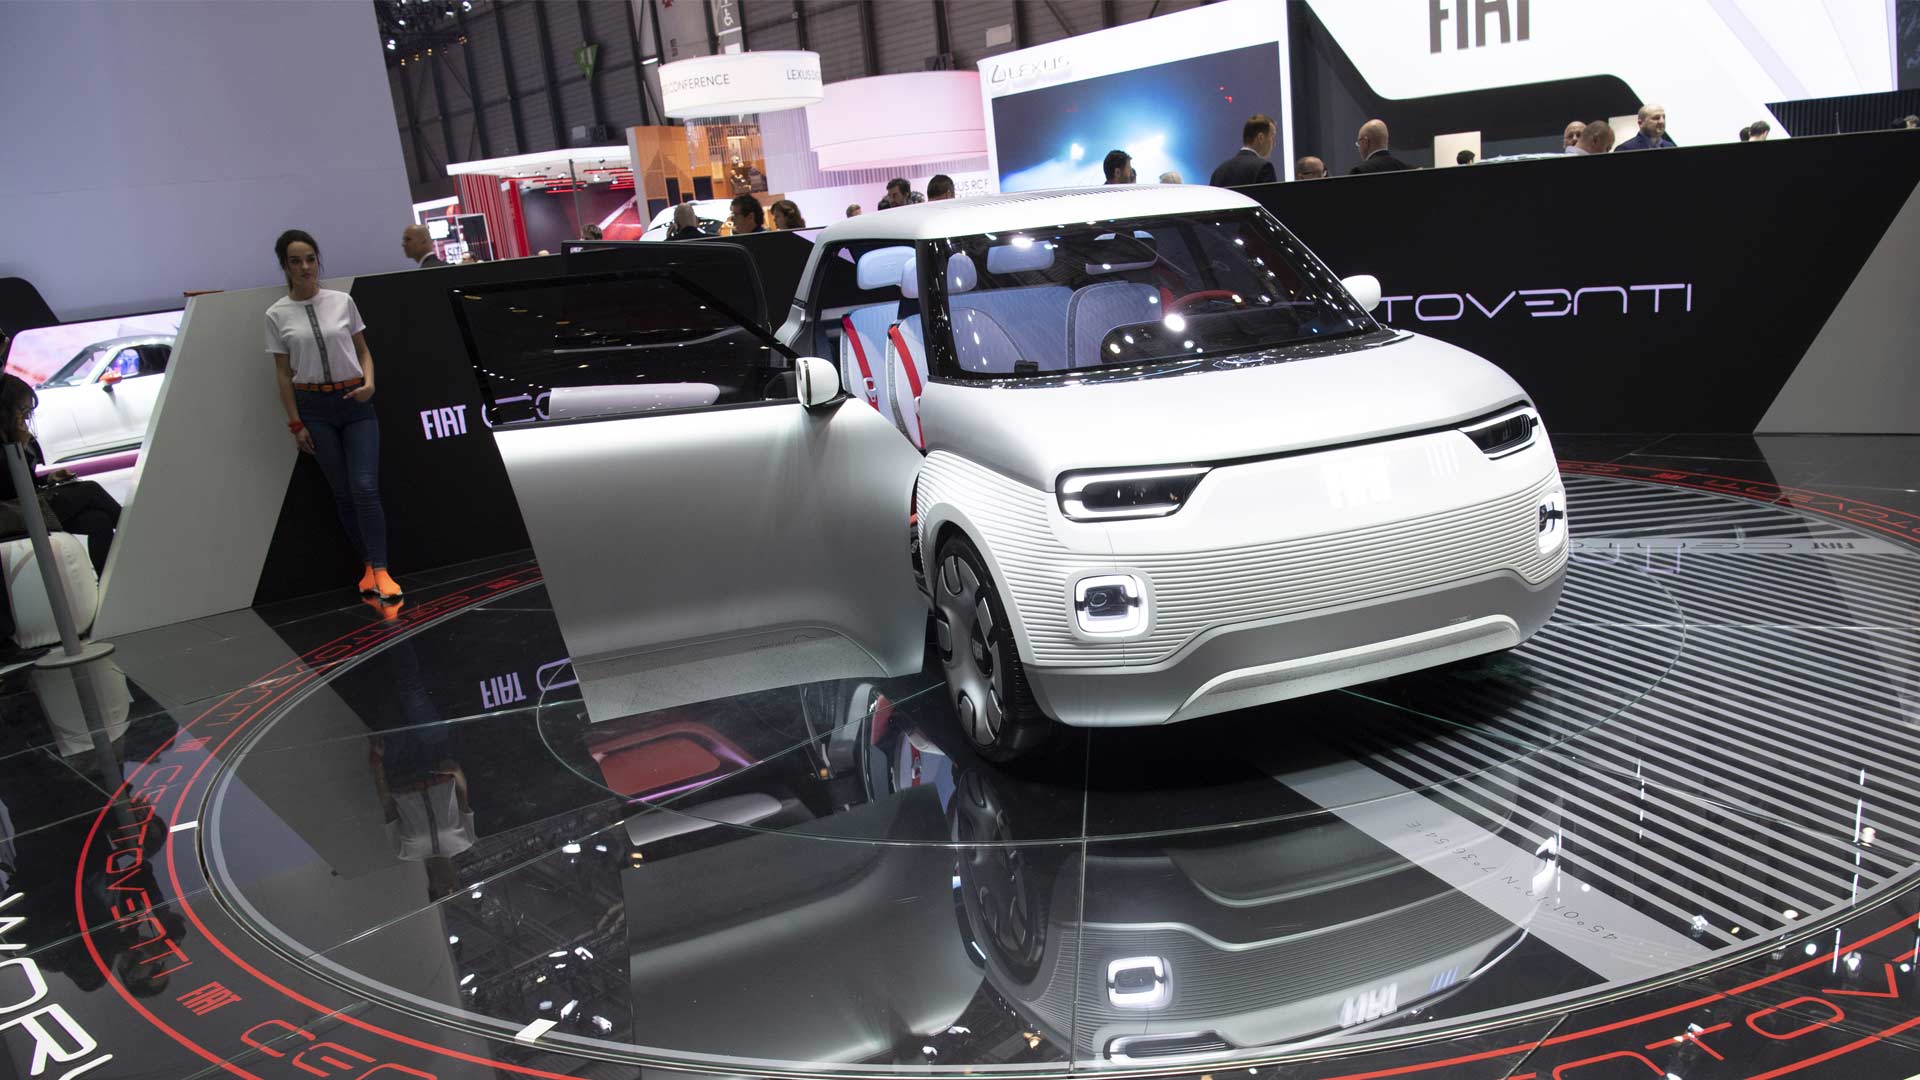 Fiat Centoventi is a modular concept with full freedom to customize